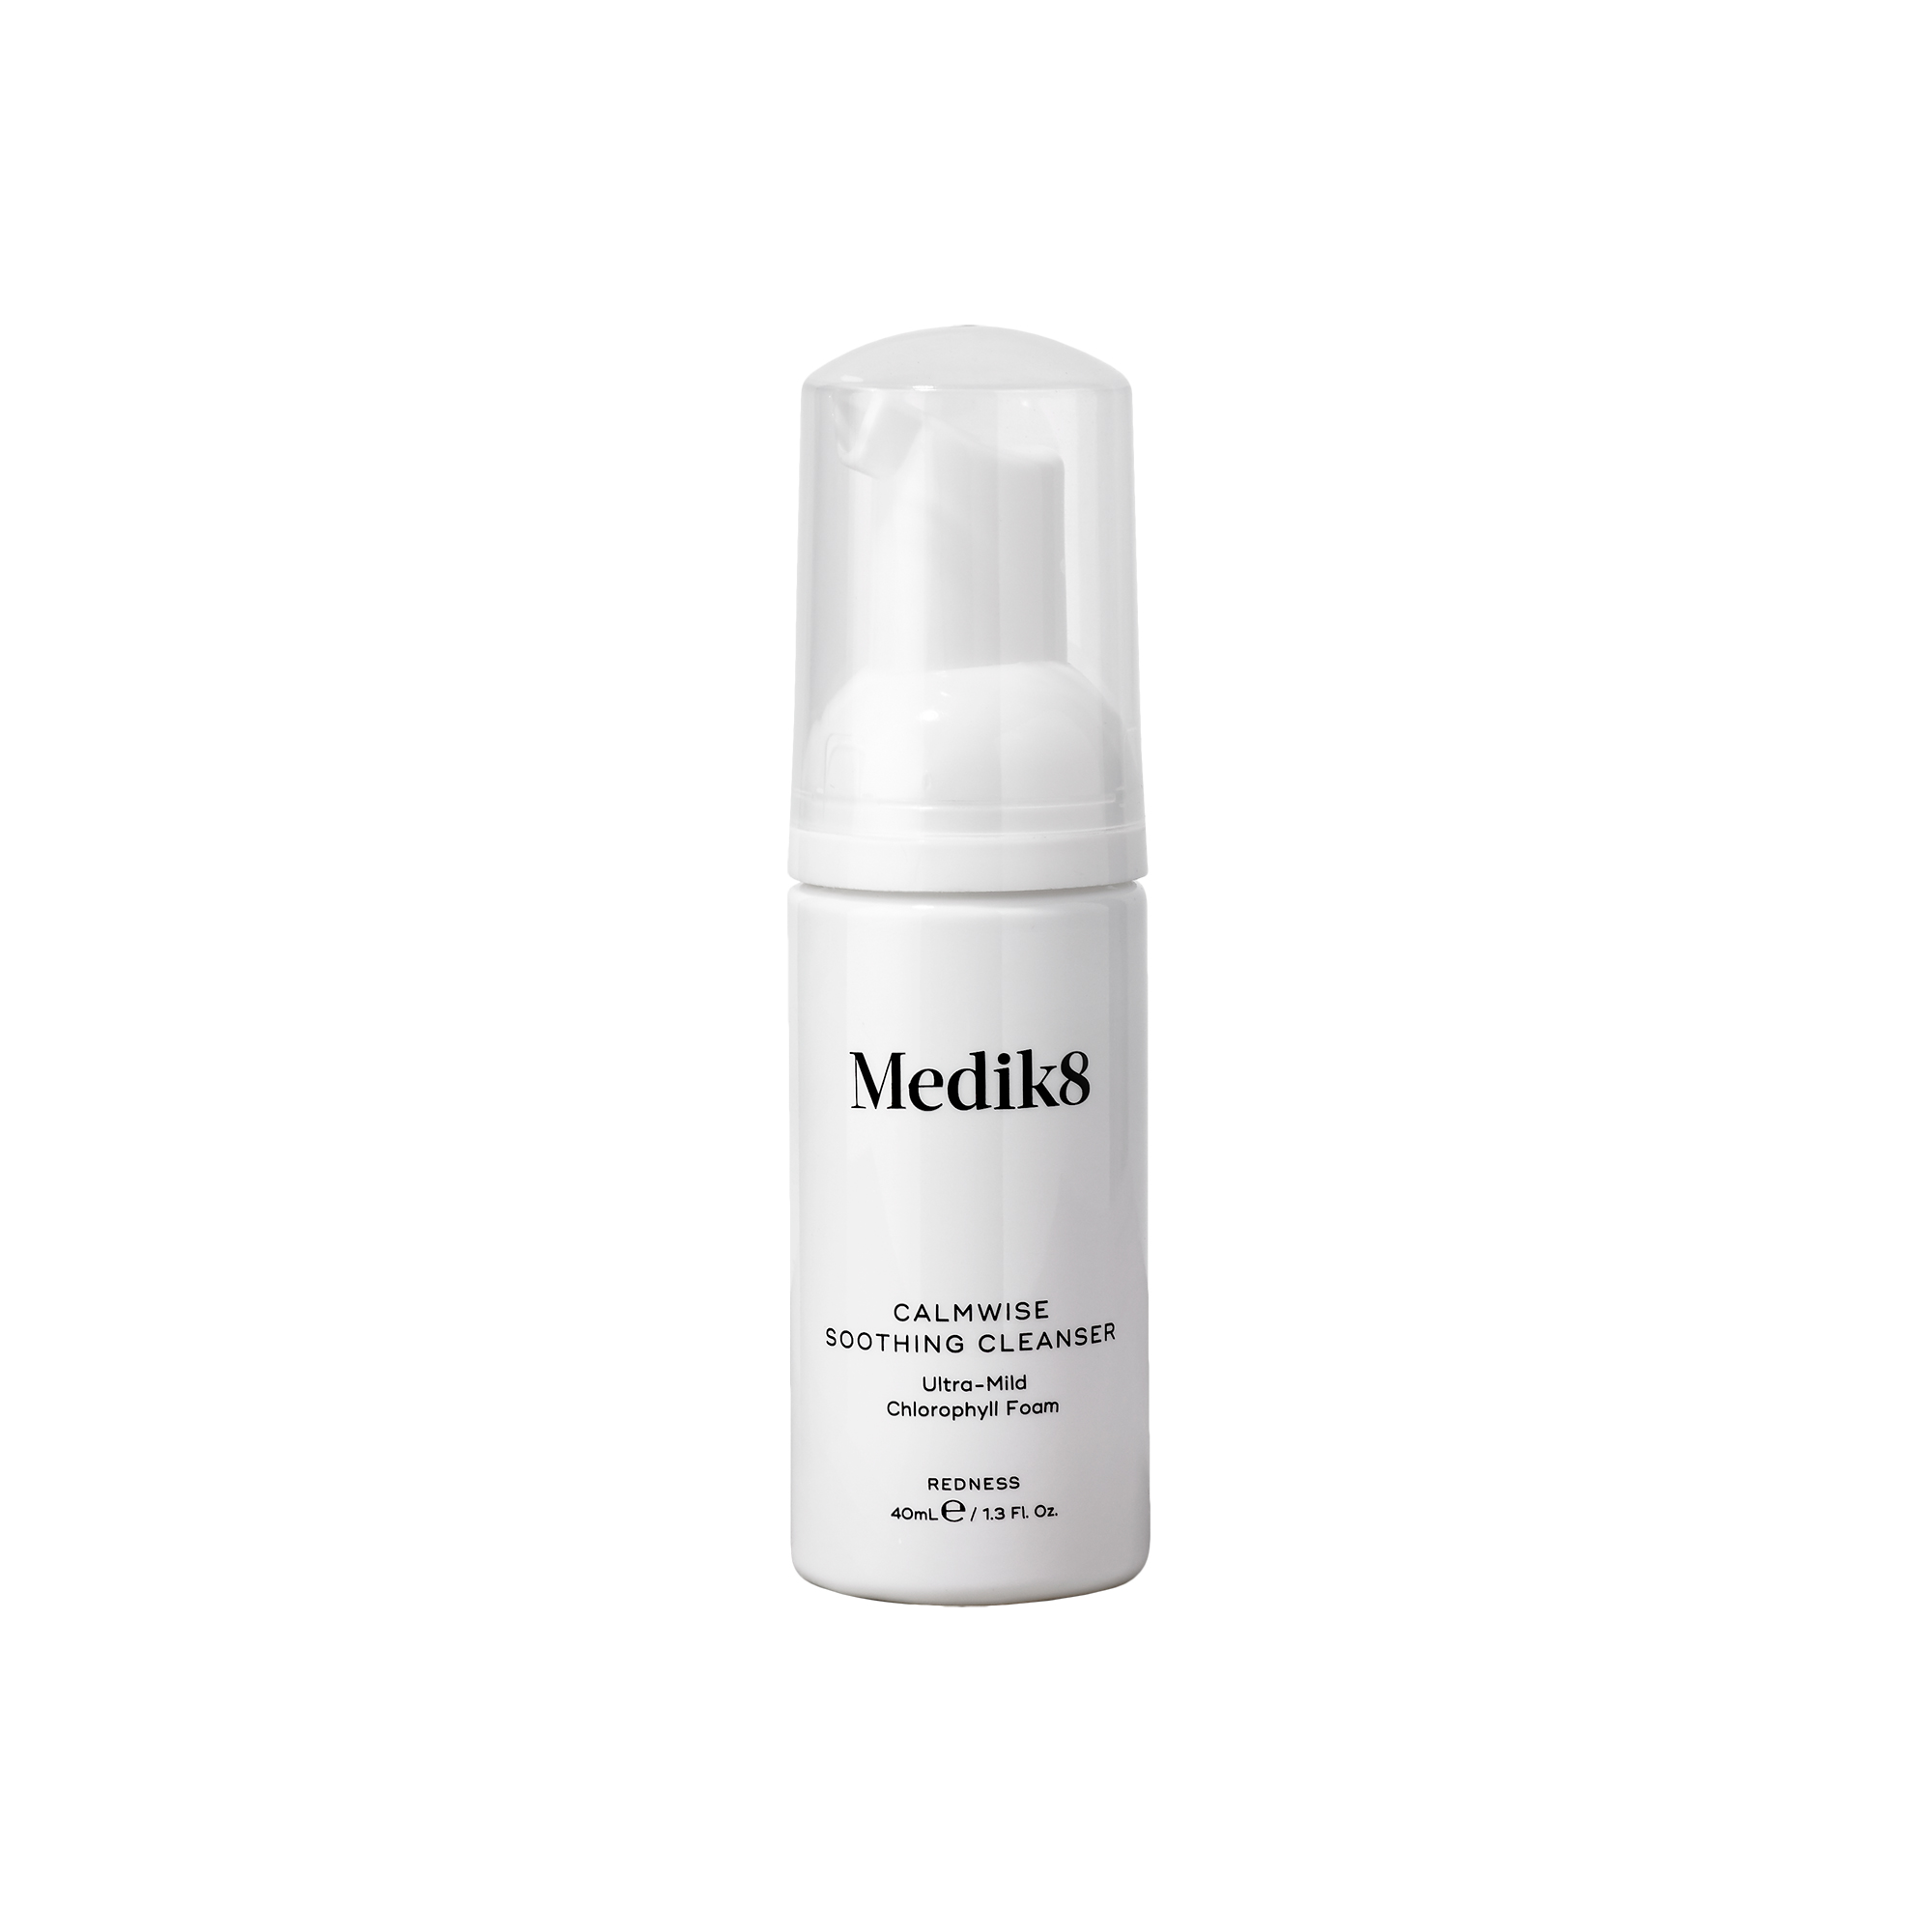 Copy of Medik8 Try Me Size Calmwise Soothing Cleanser 40ml